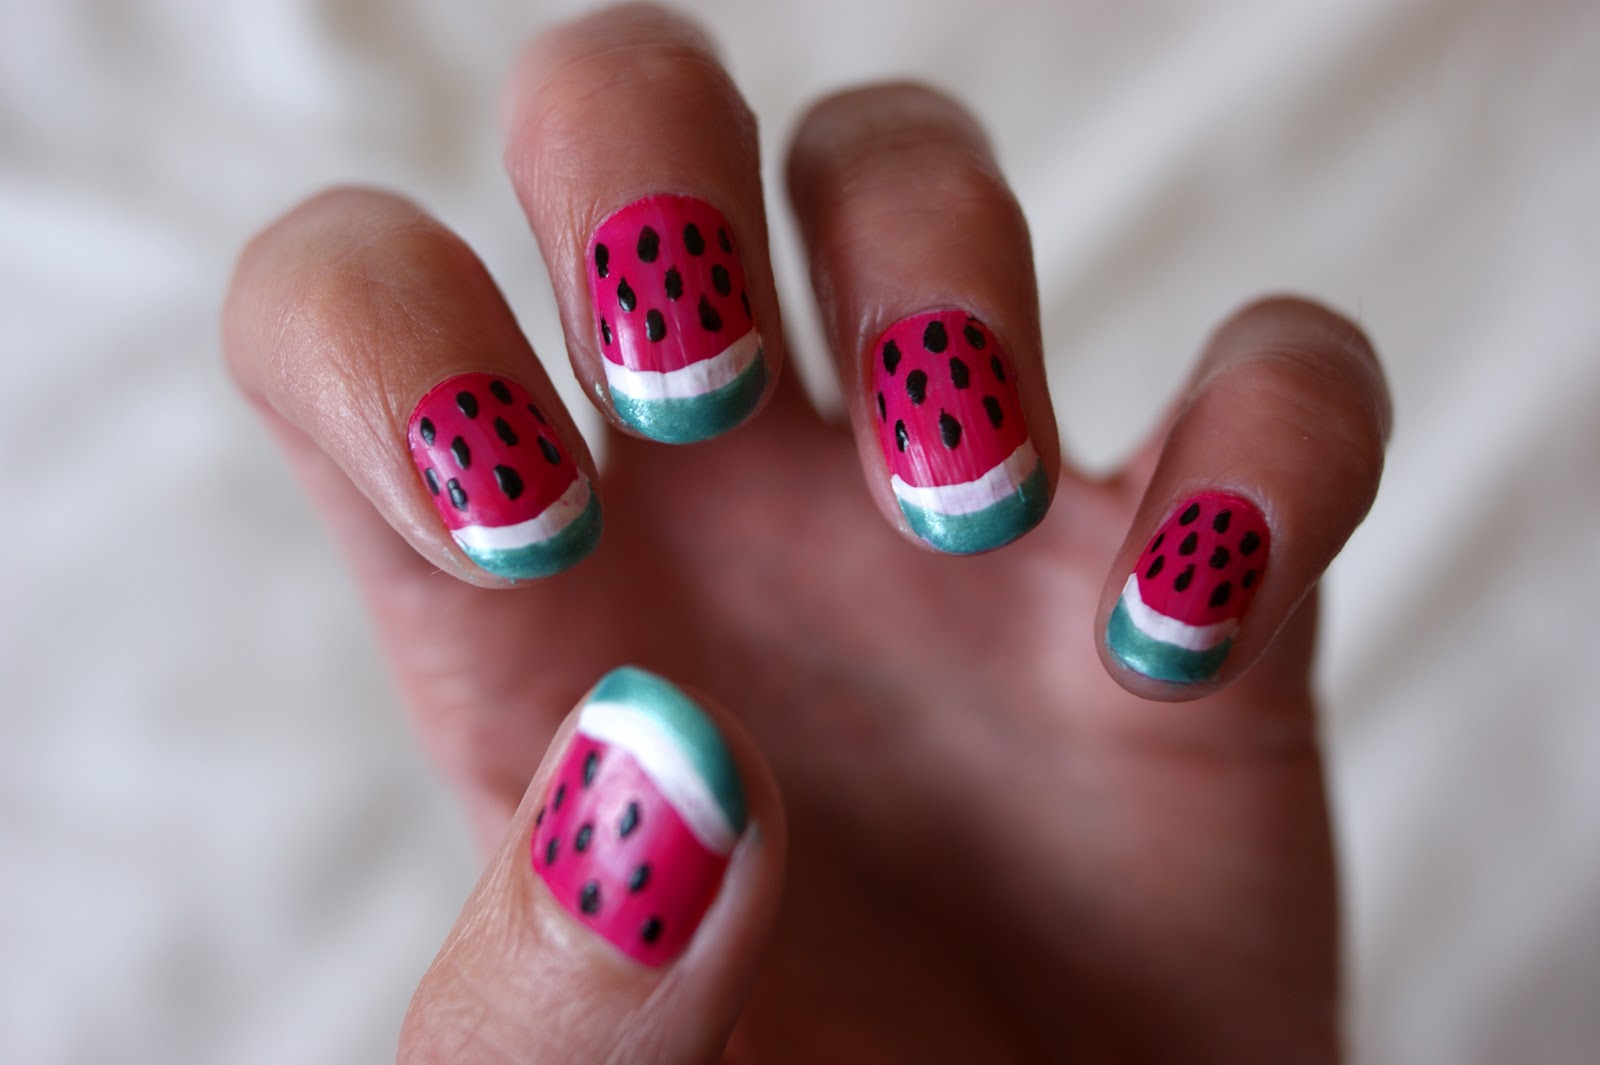 6. Nail Art Pictures - wide 7